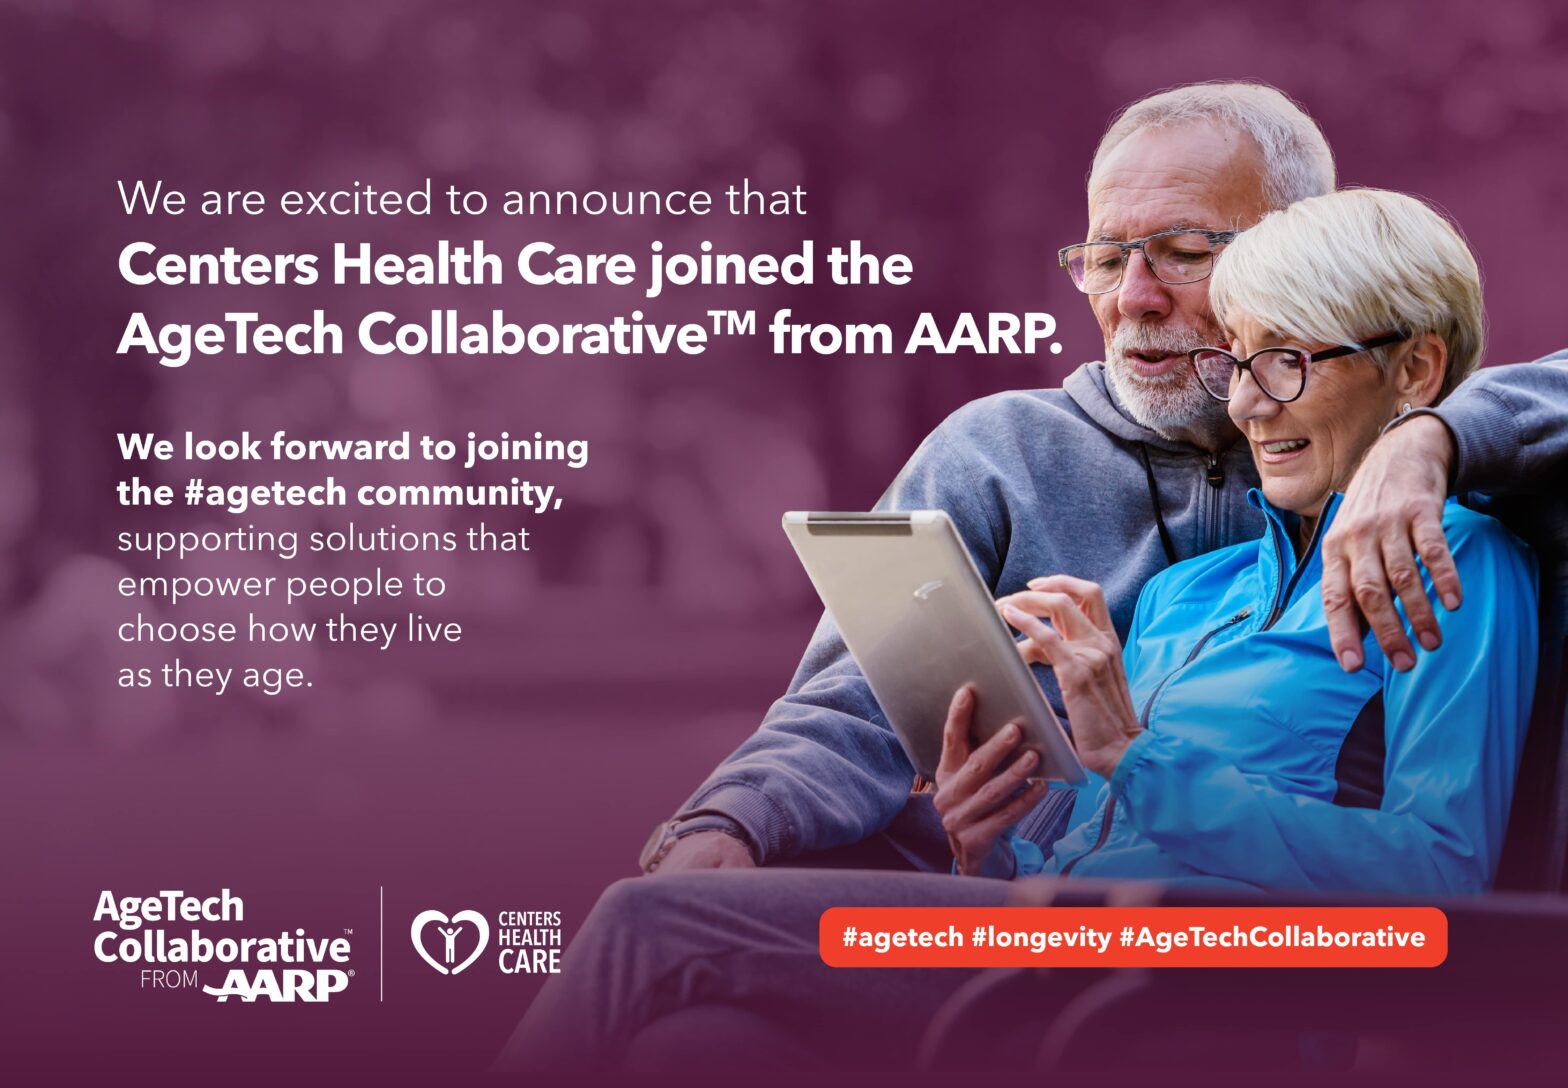 Centers Health Care’s major new connection  in support of the aging population